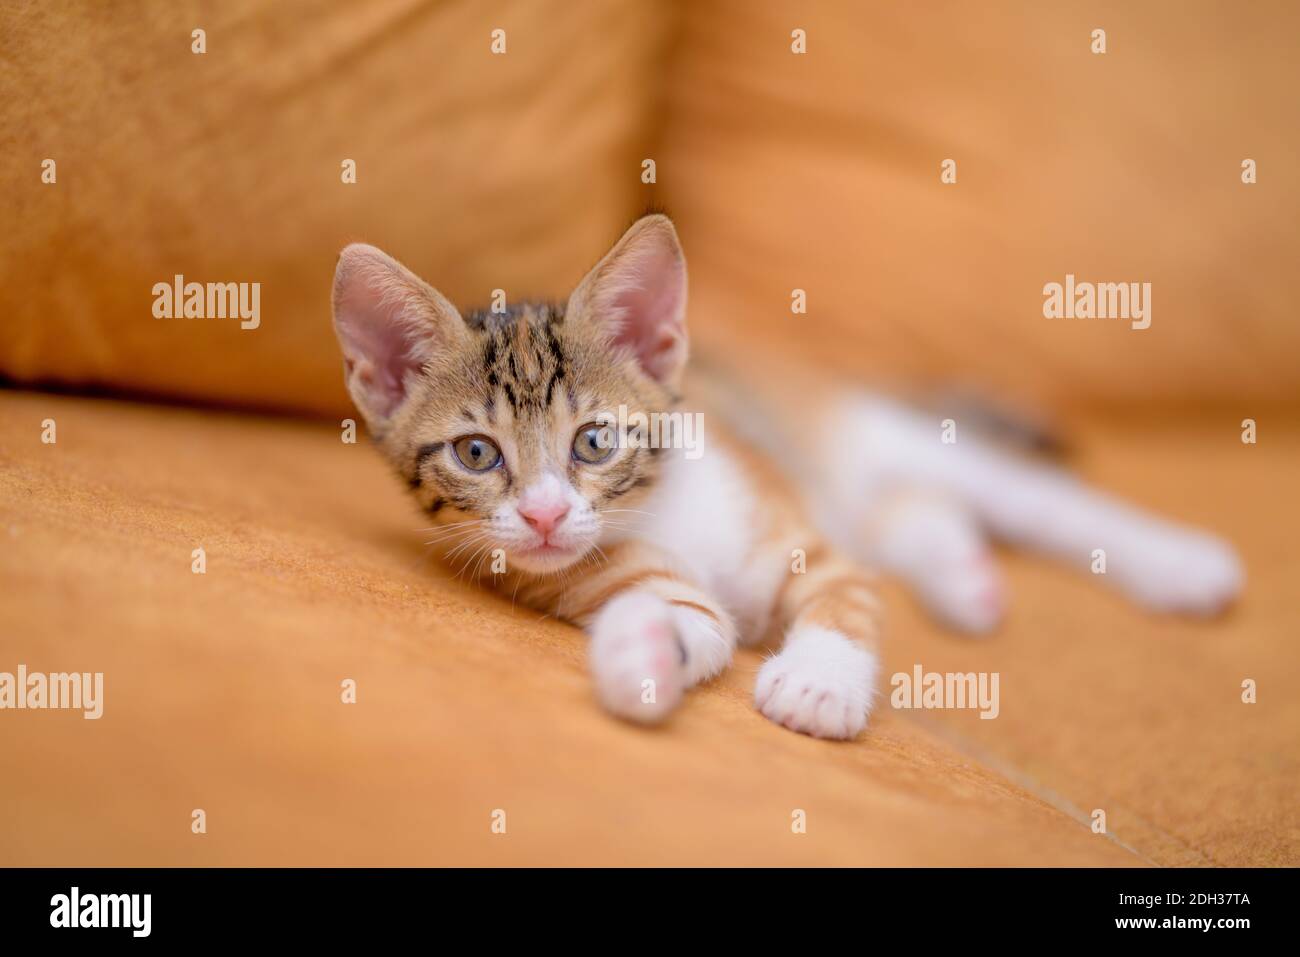 One month old baby kitten looking curious Stock Photo